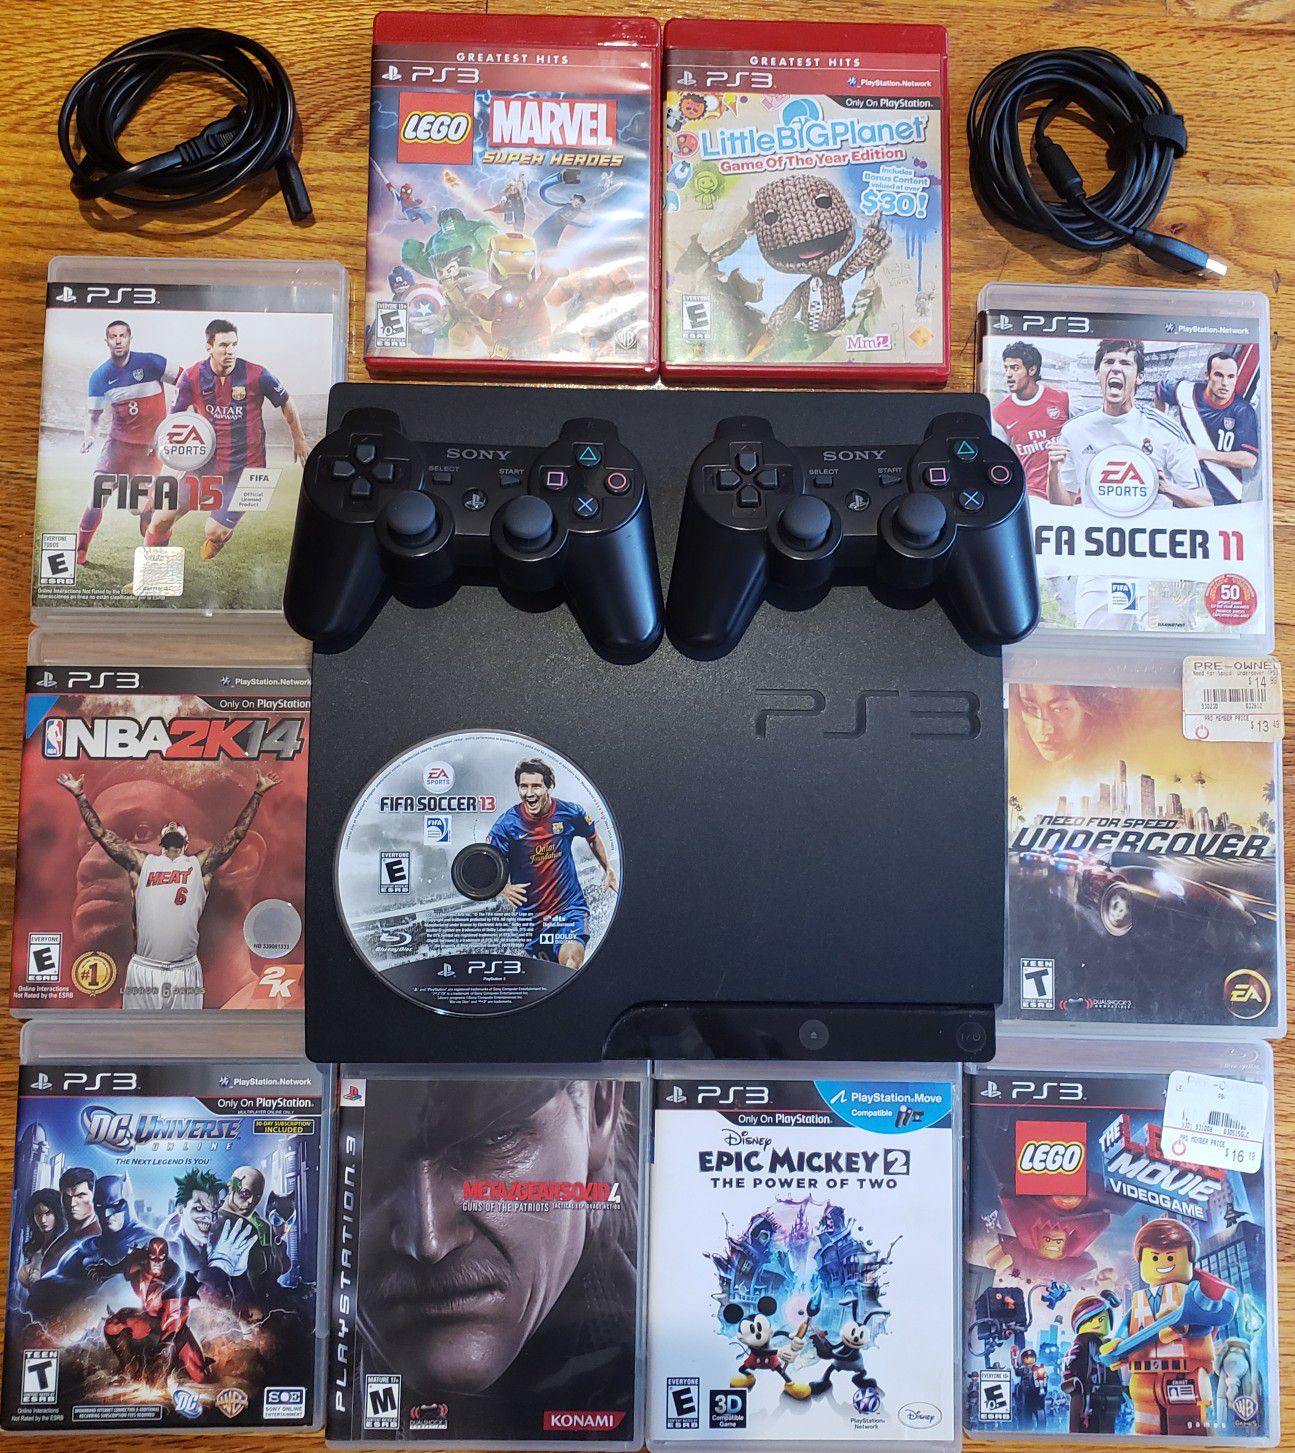 Ps3 slim, 320 gb cords included and 11 games